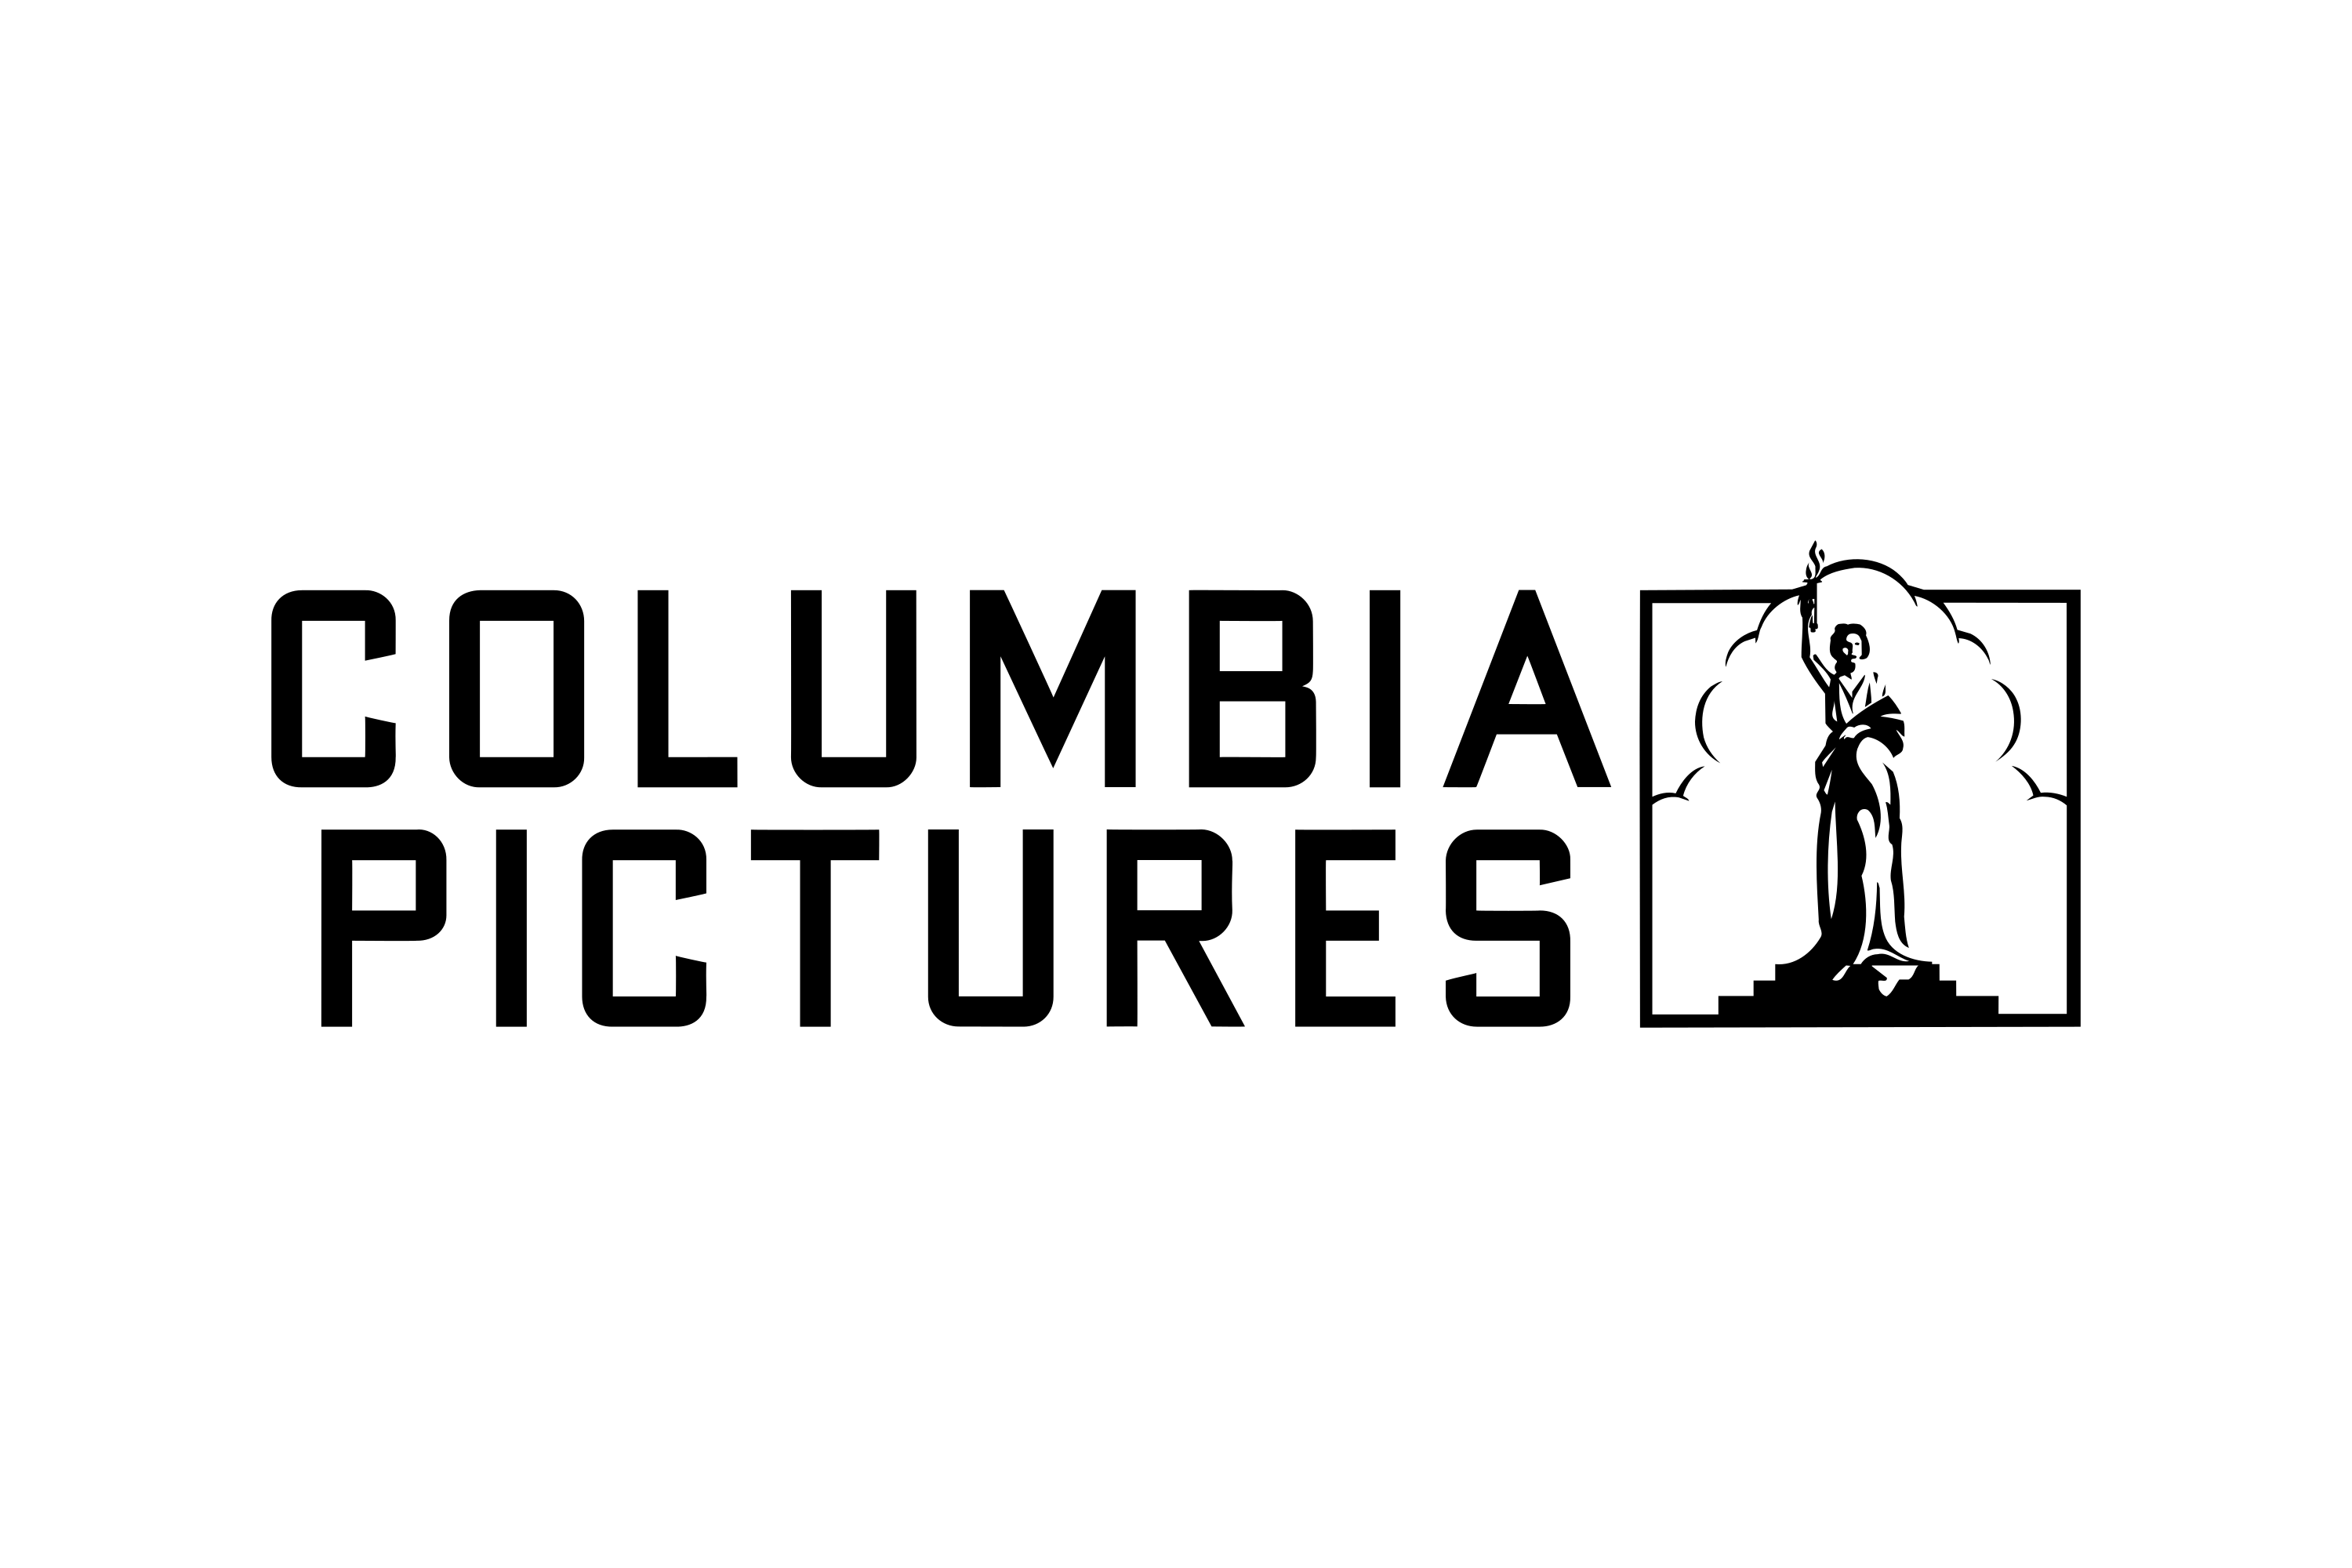 Download Columbia Pictures Logo in SVG Vector or PNG File Format - Logo